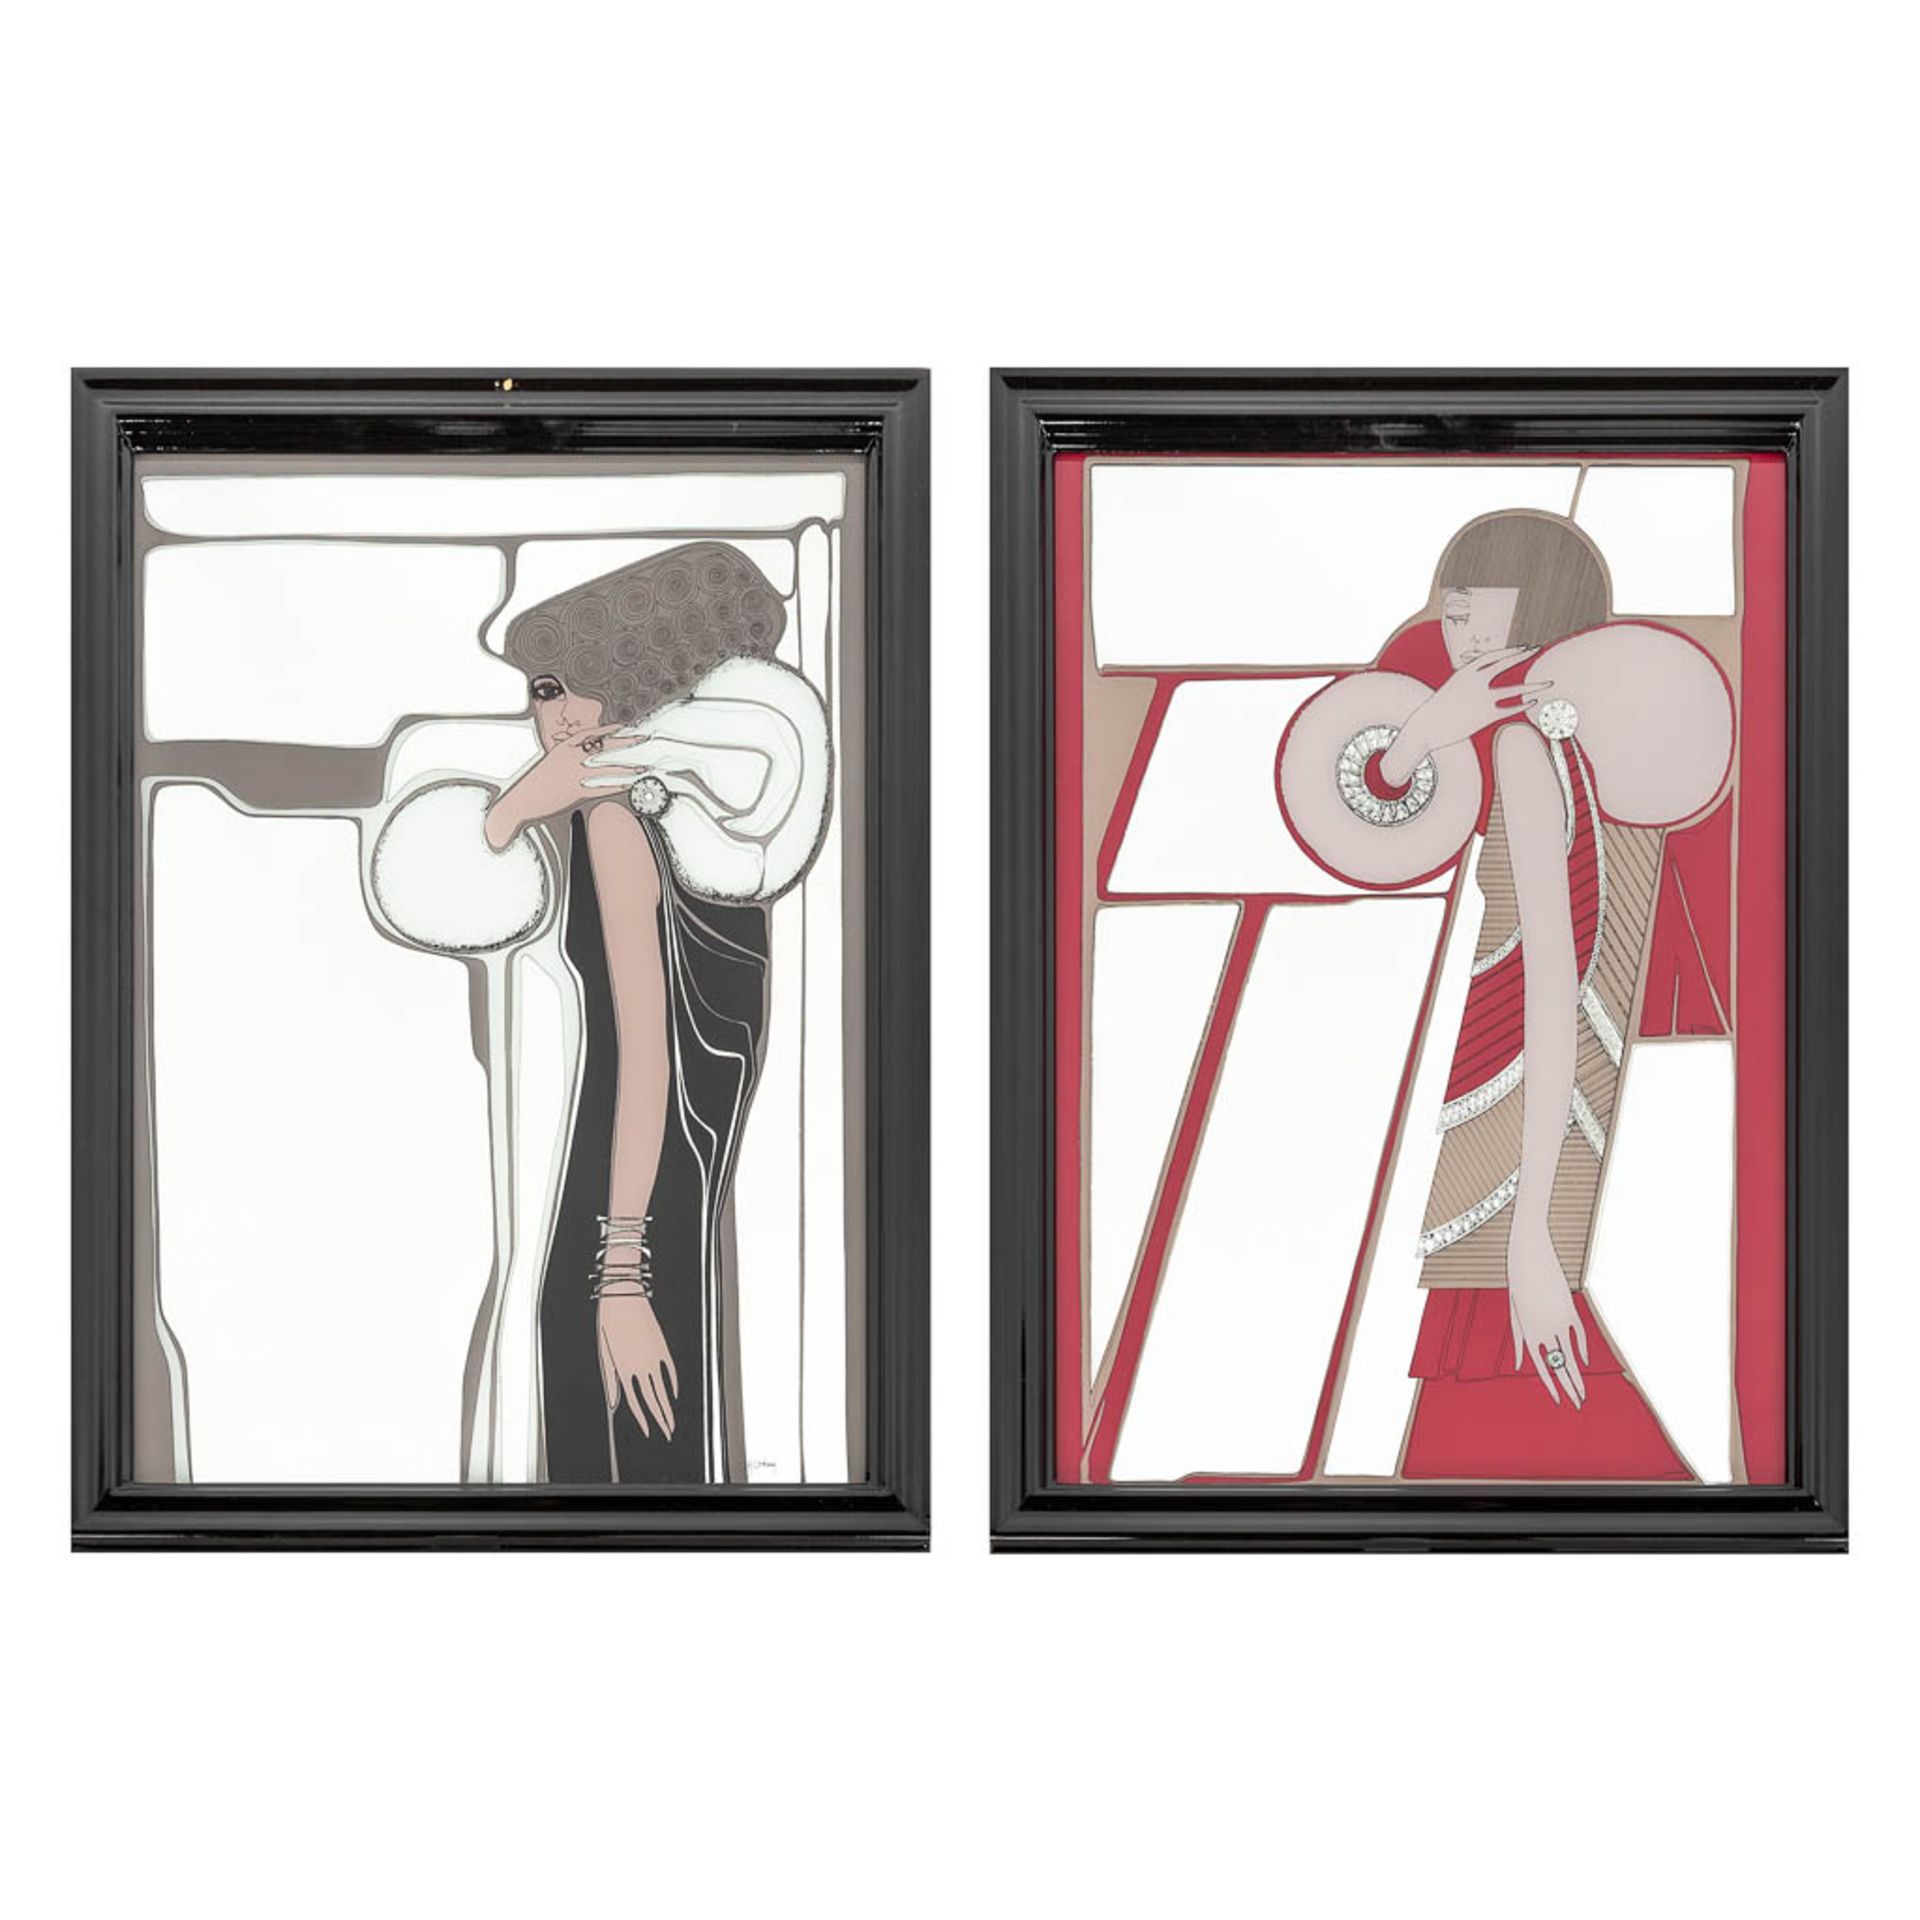 A decorative pair of framed mirrors, with an Art Deco style image. (W:60 x H:79 cm)